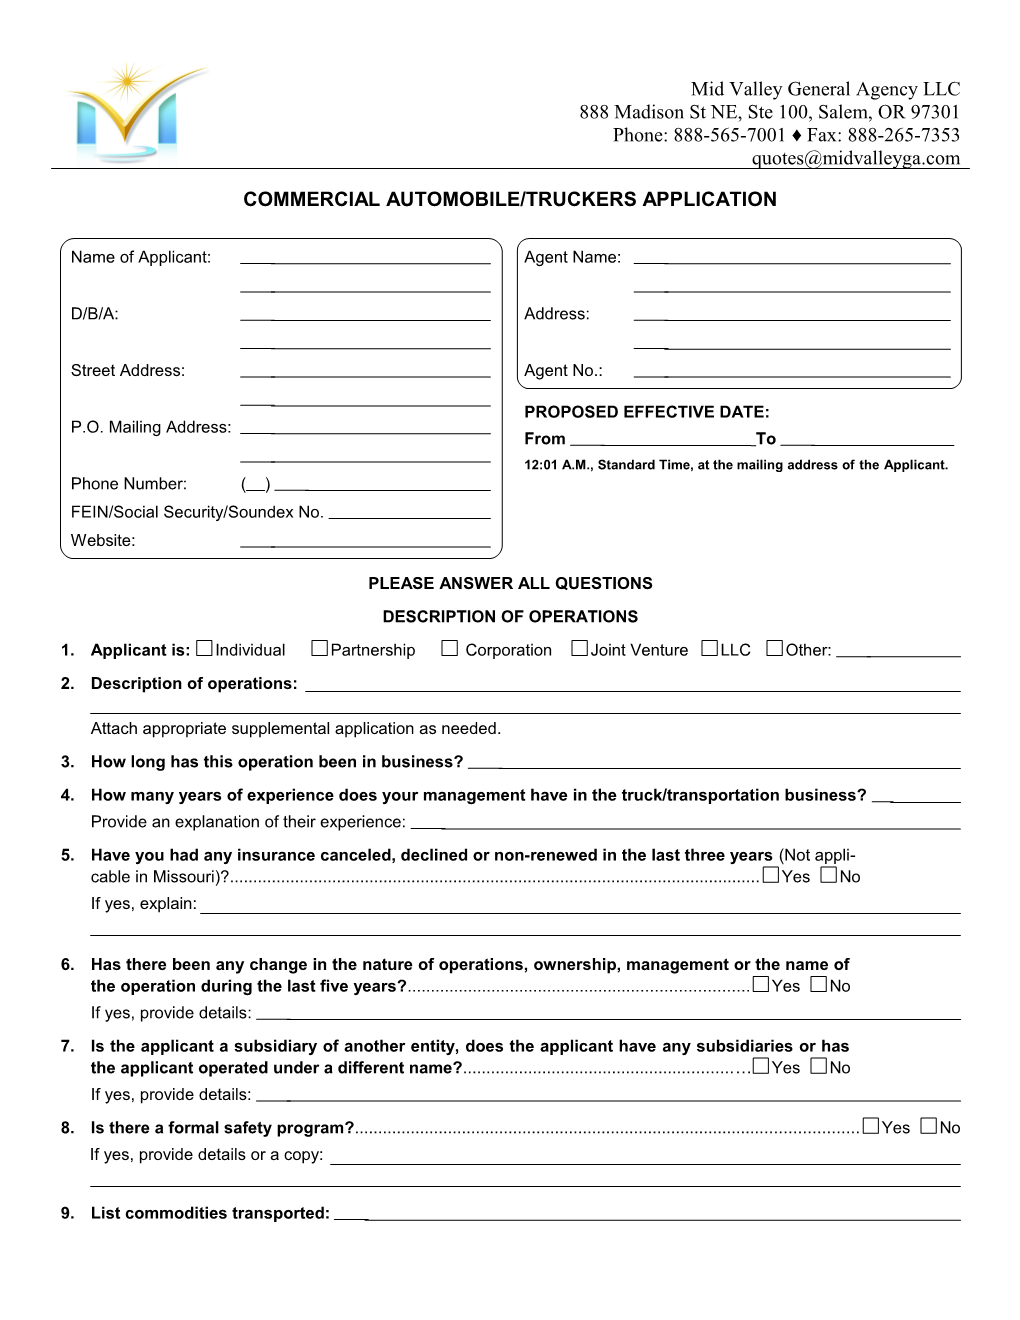 Commercial Automobile/Truckers Application s2